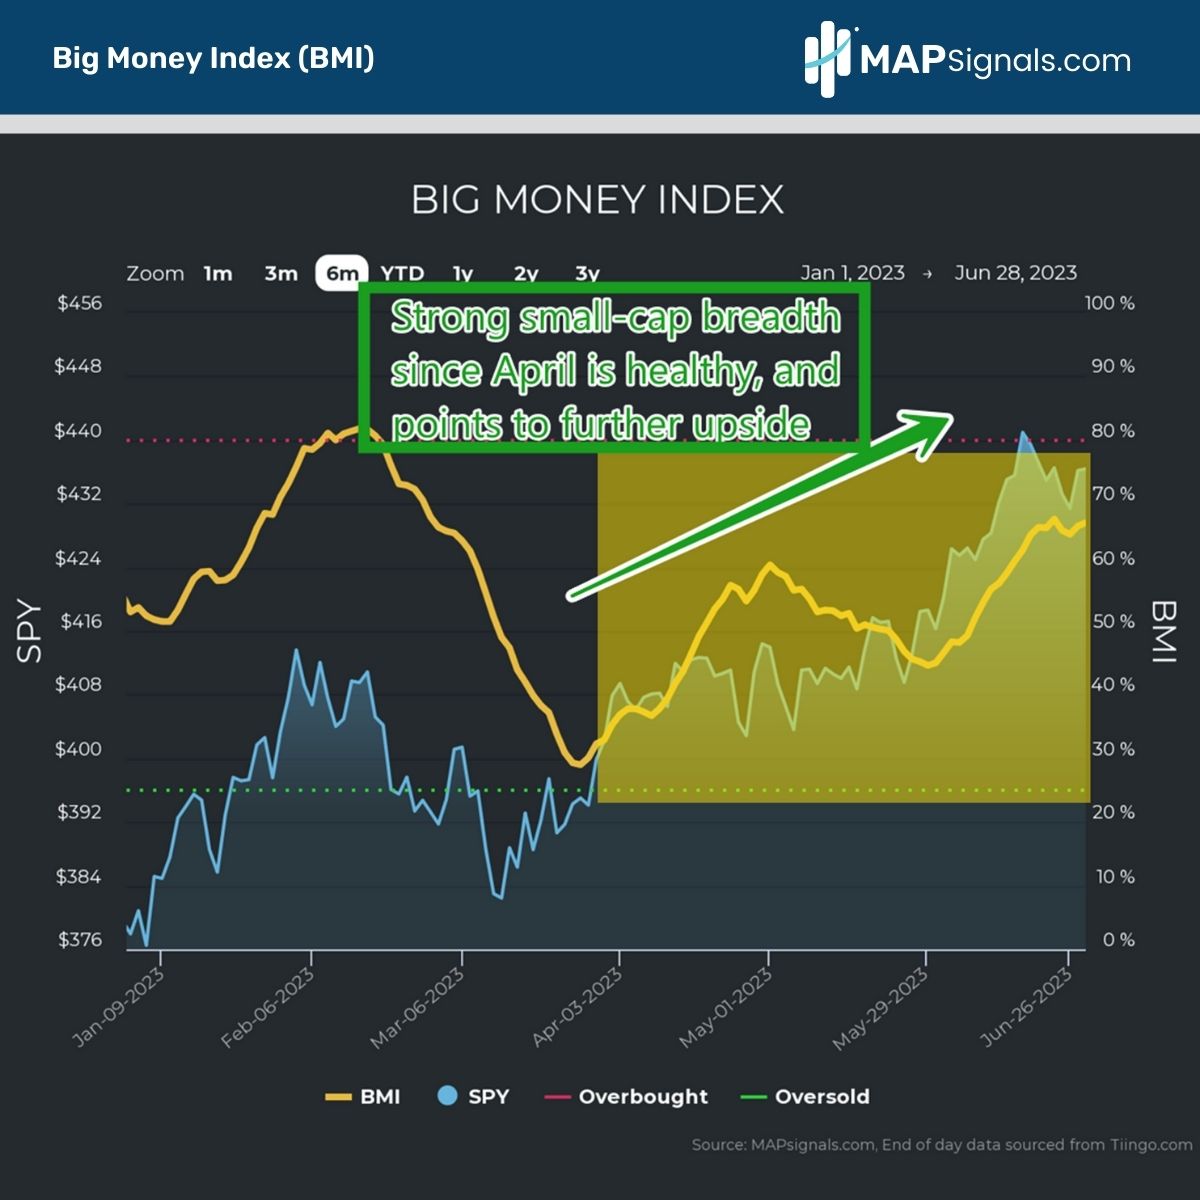 Healthy Small-Cap Breadth points to upside for stocks | MAPsignals